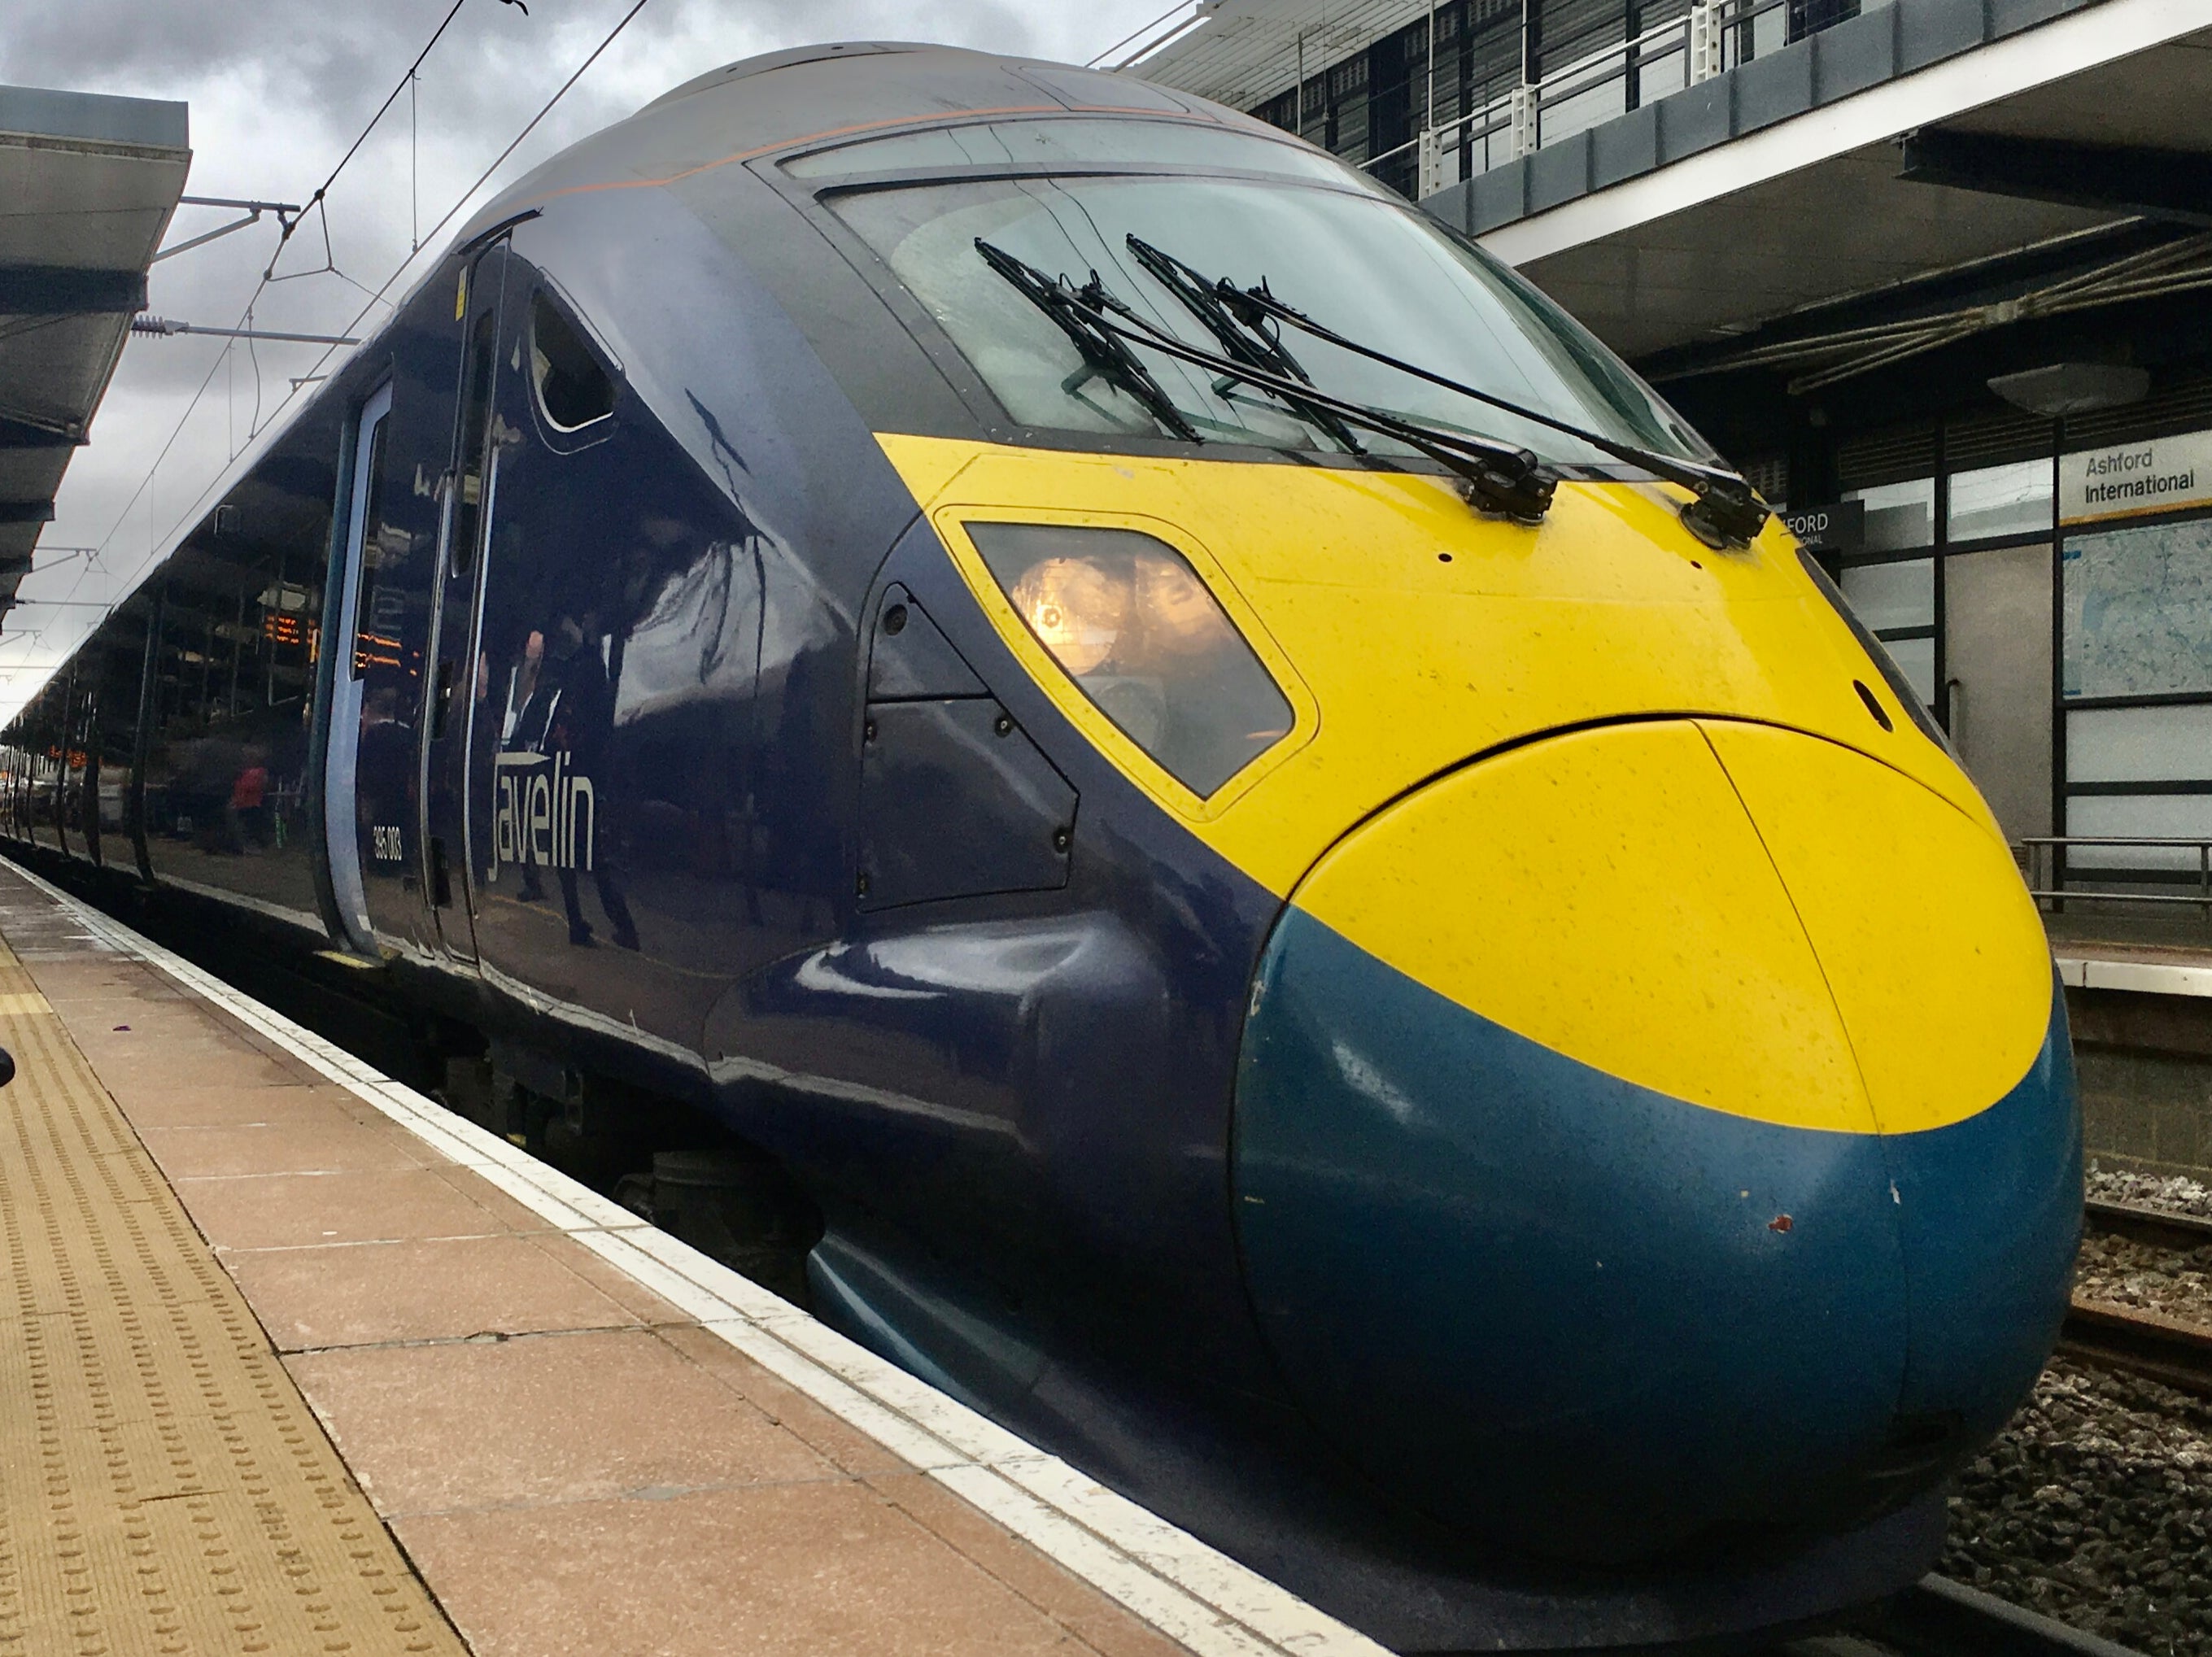 All aboard? Southeastern high-speed train from Kent to London